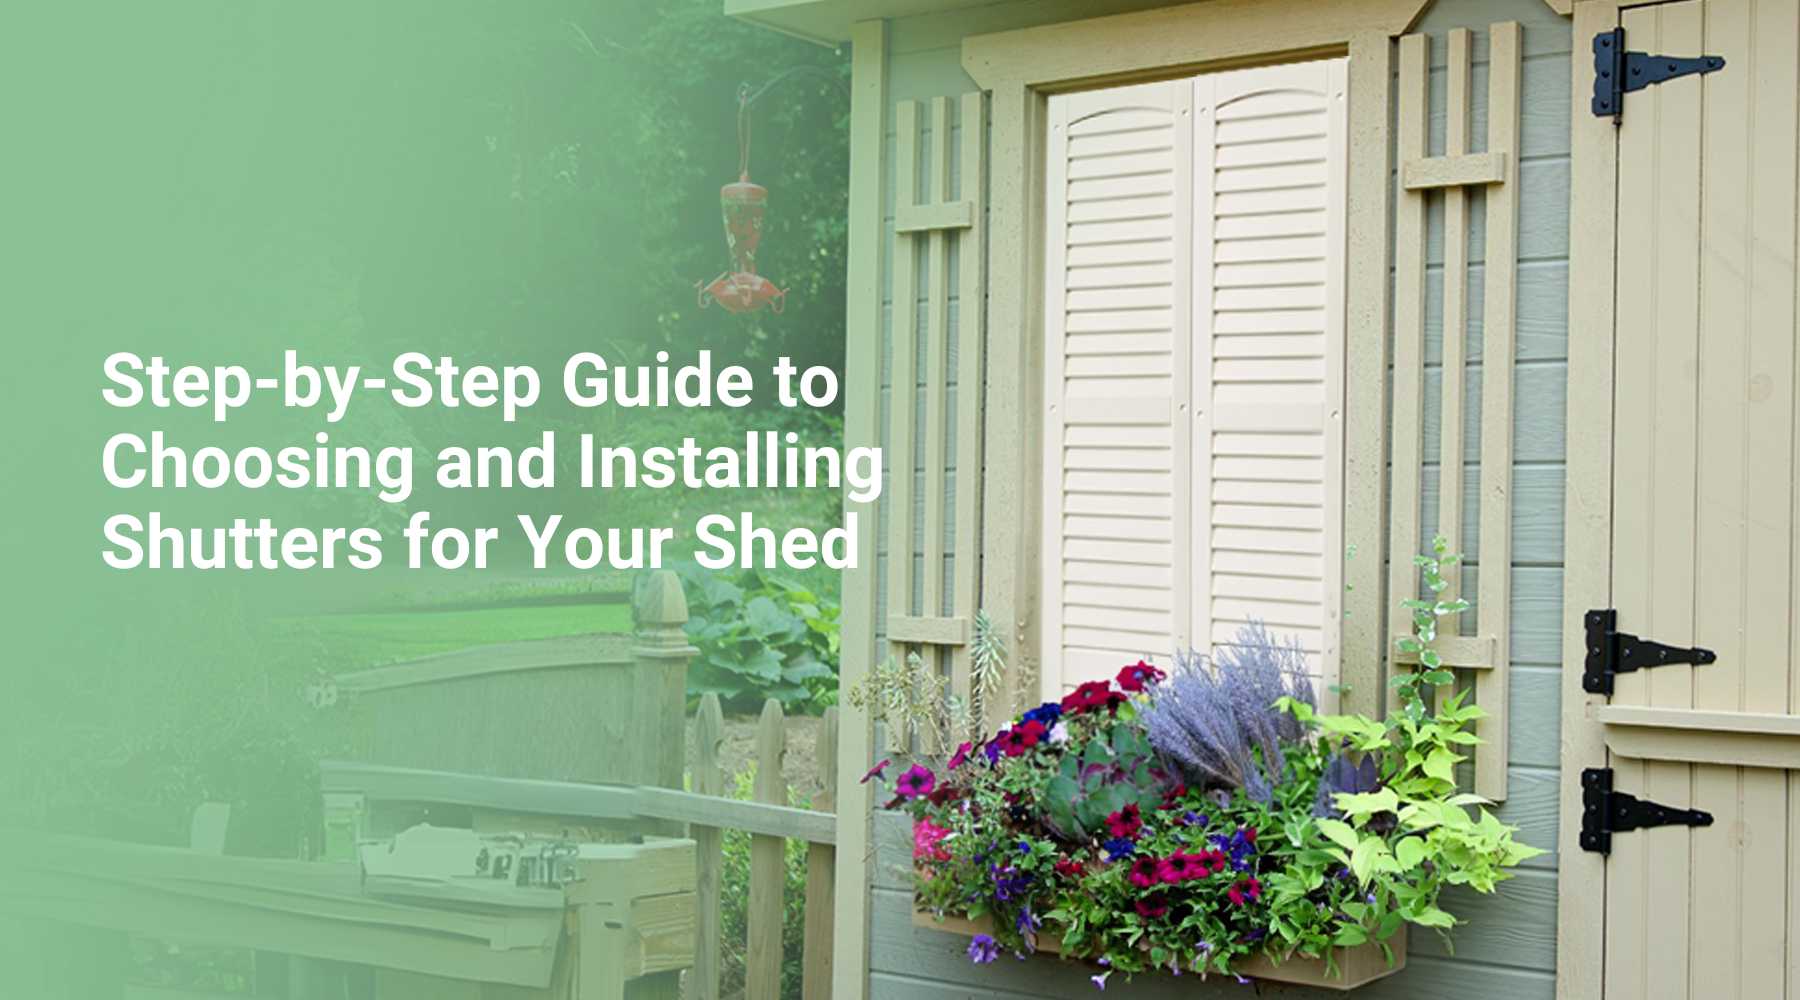 Step-by-Step Guide to Choosing and Installing Shutters for Your Shed Windows